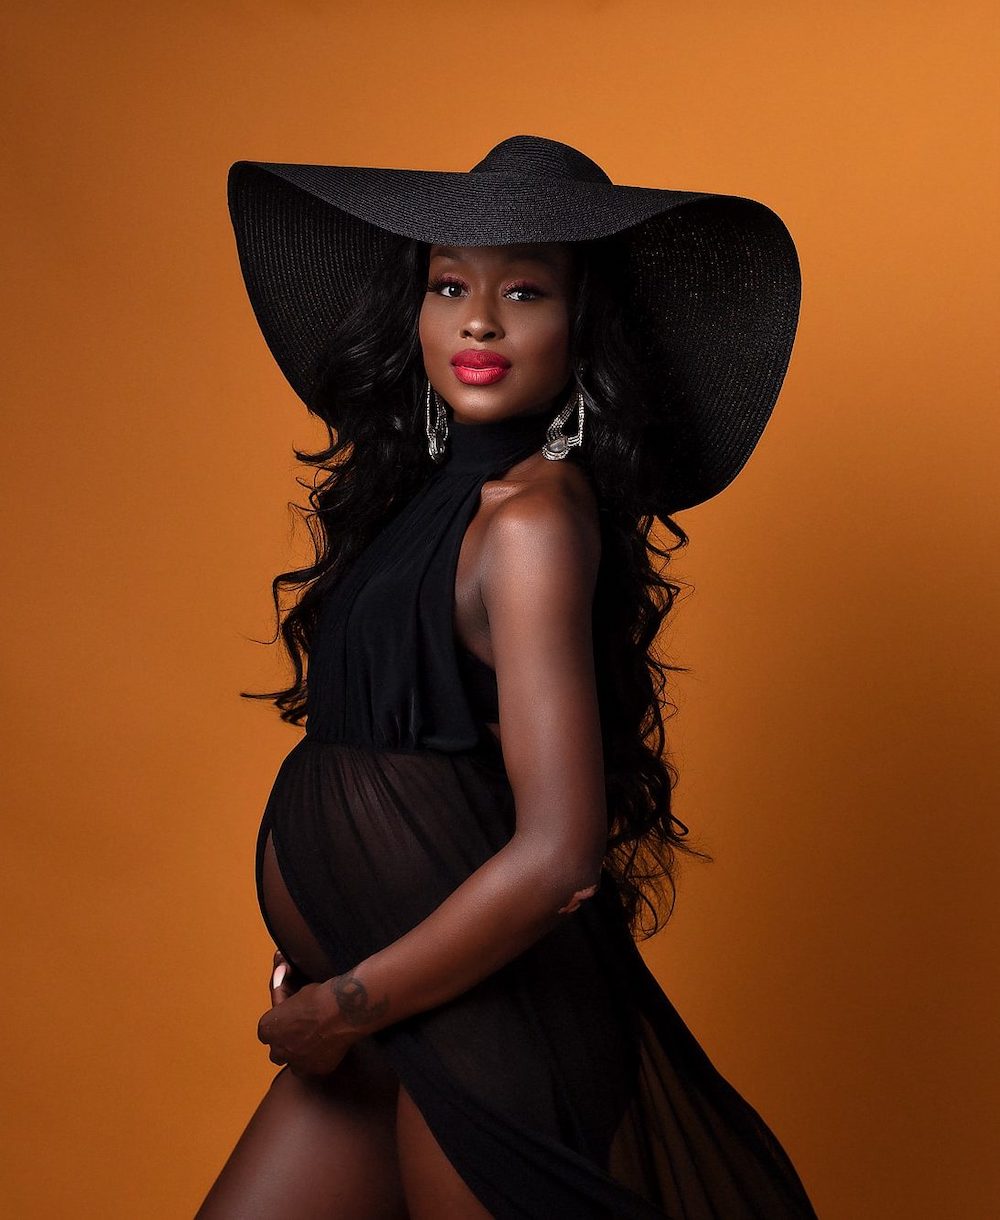 Tianna J Williams' maternity portraits are often closer to fashion shoots in style